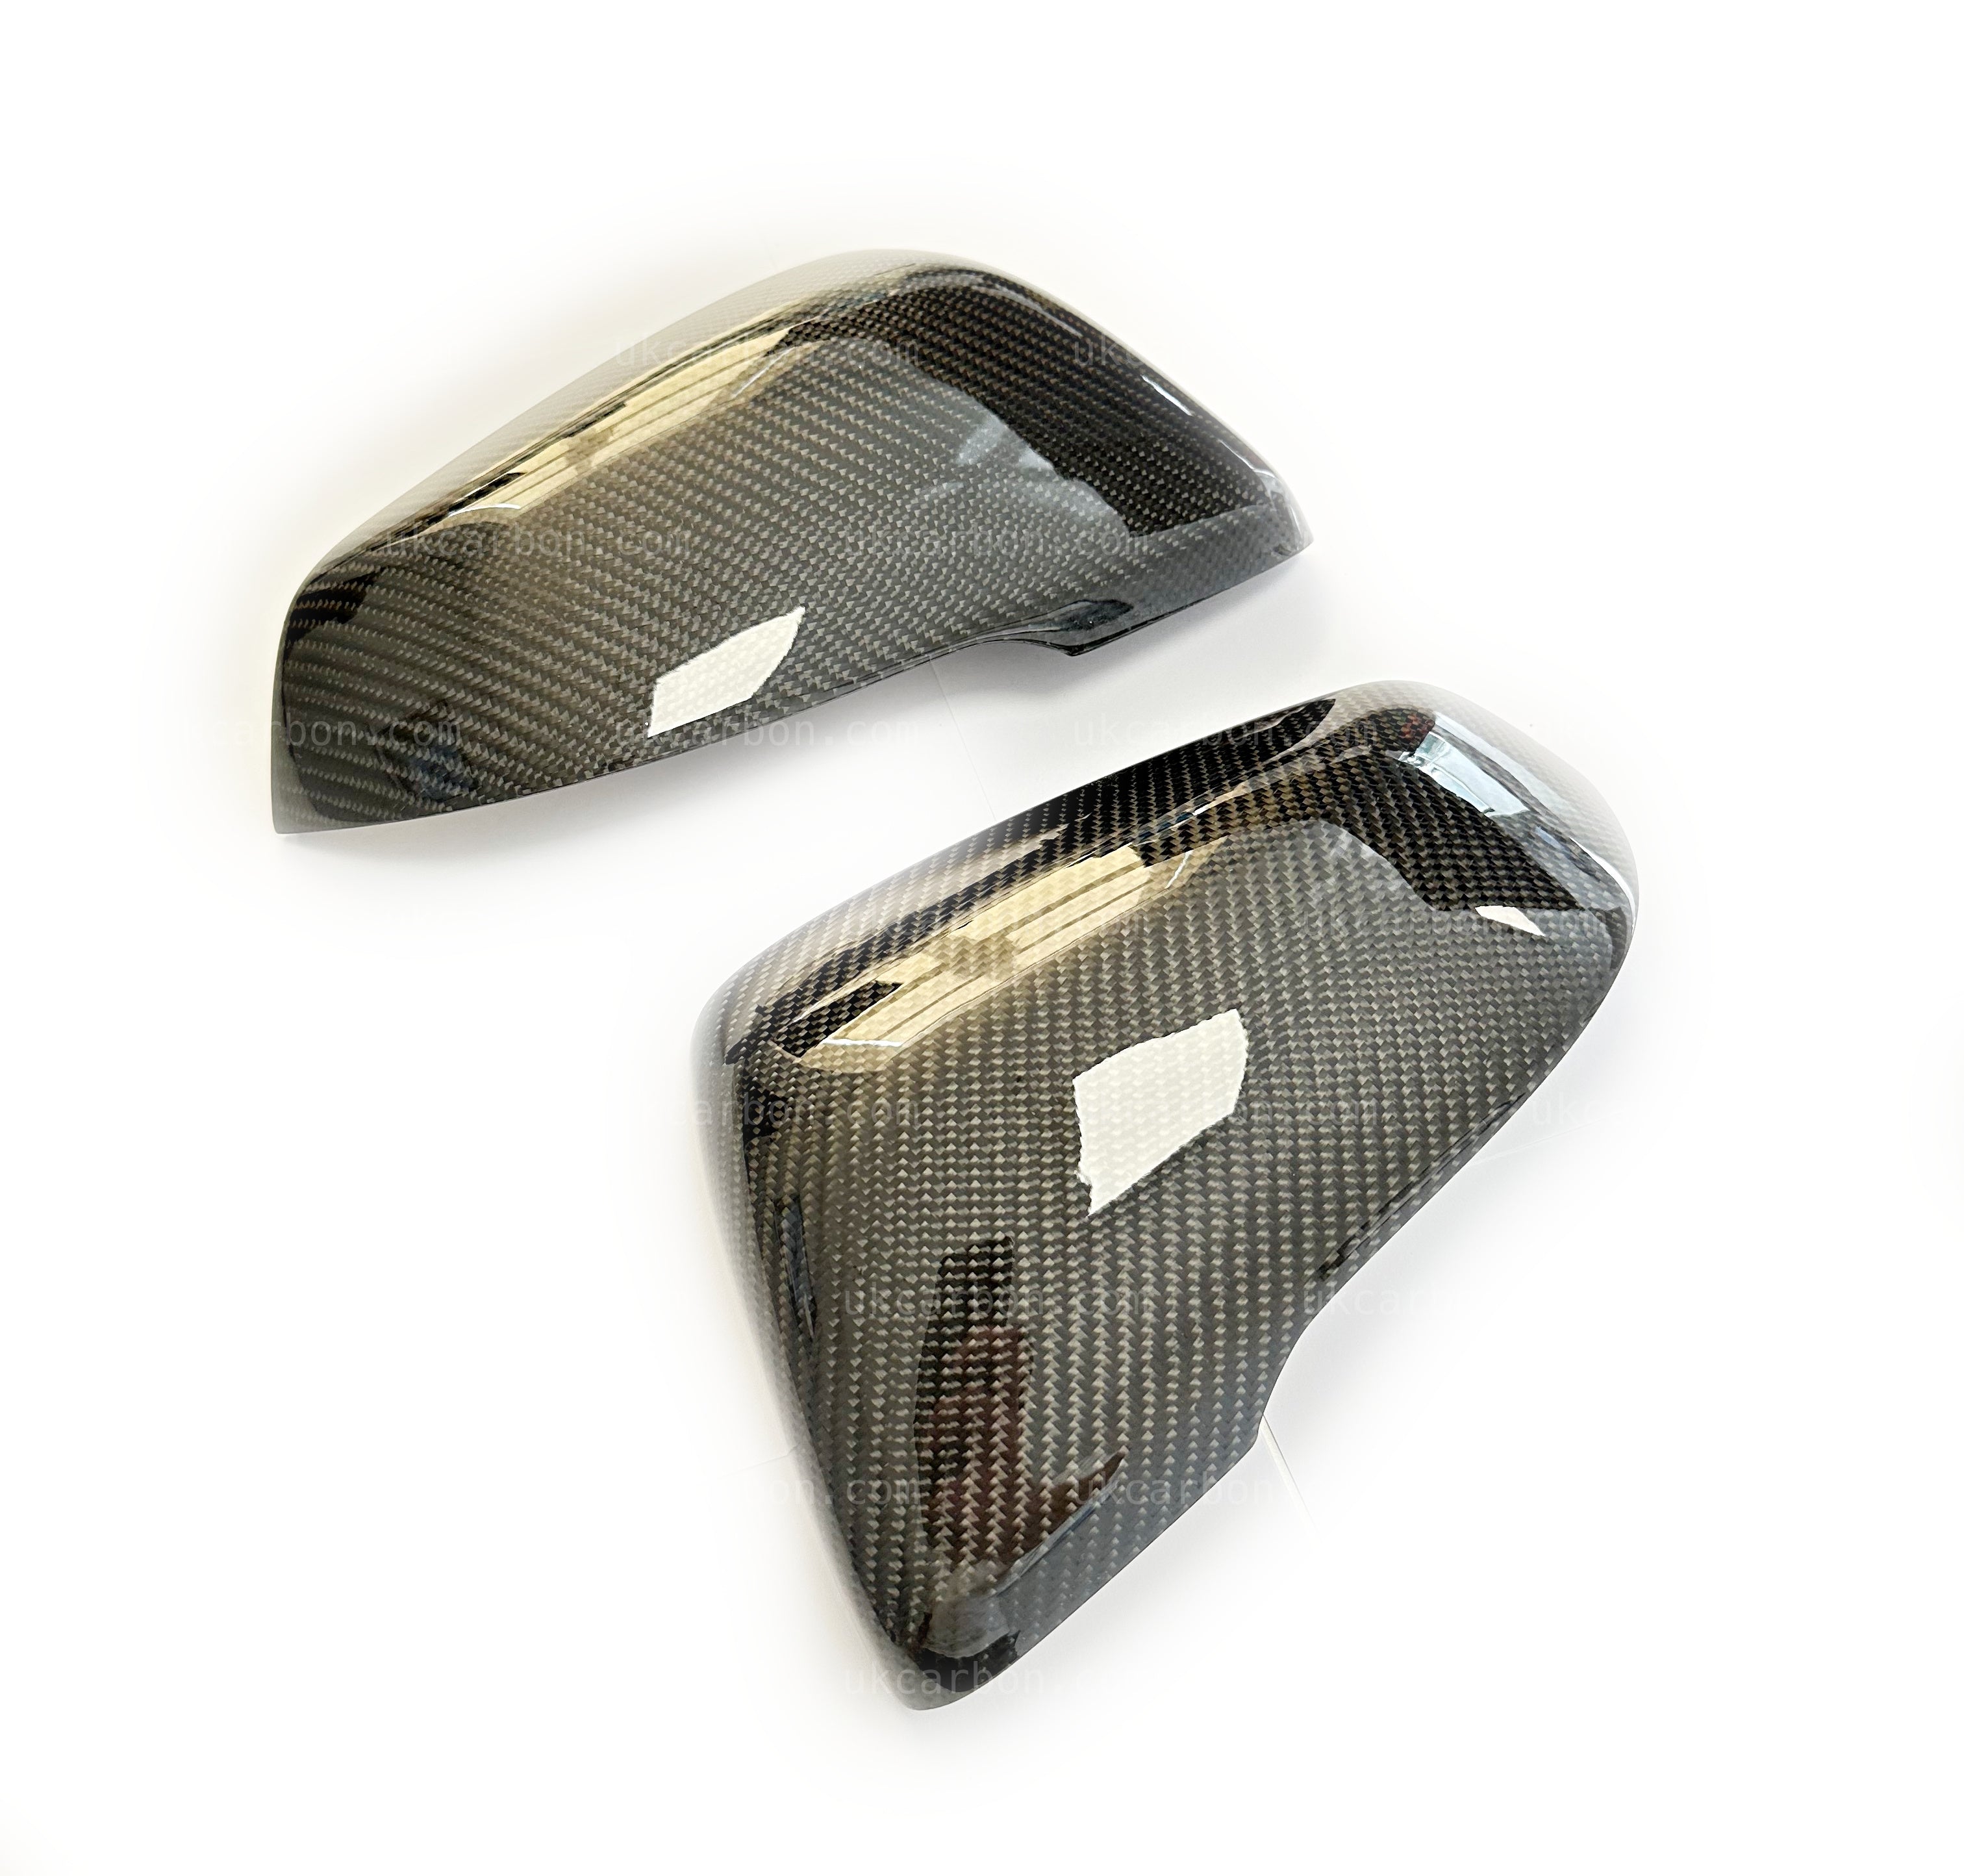 BMW Z4 Carbon Mirror Fibre Wing Cover Replacements M Performance G29 by UKCarbon